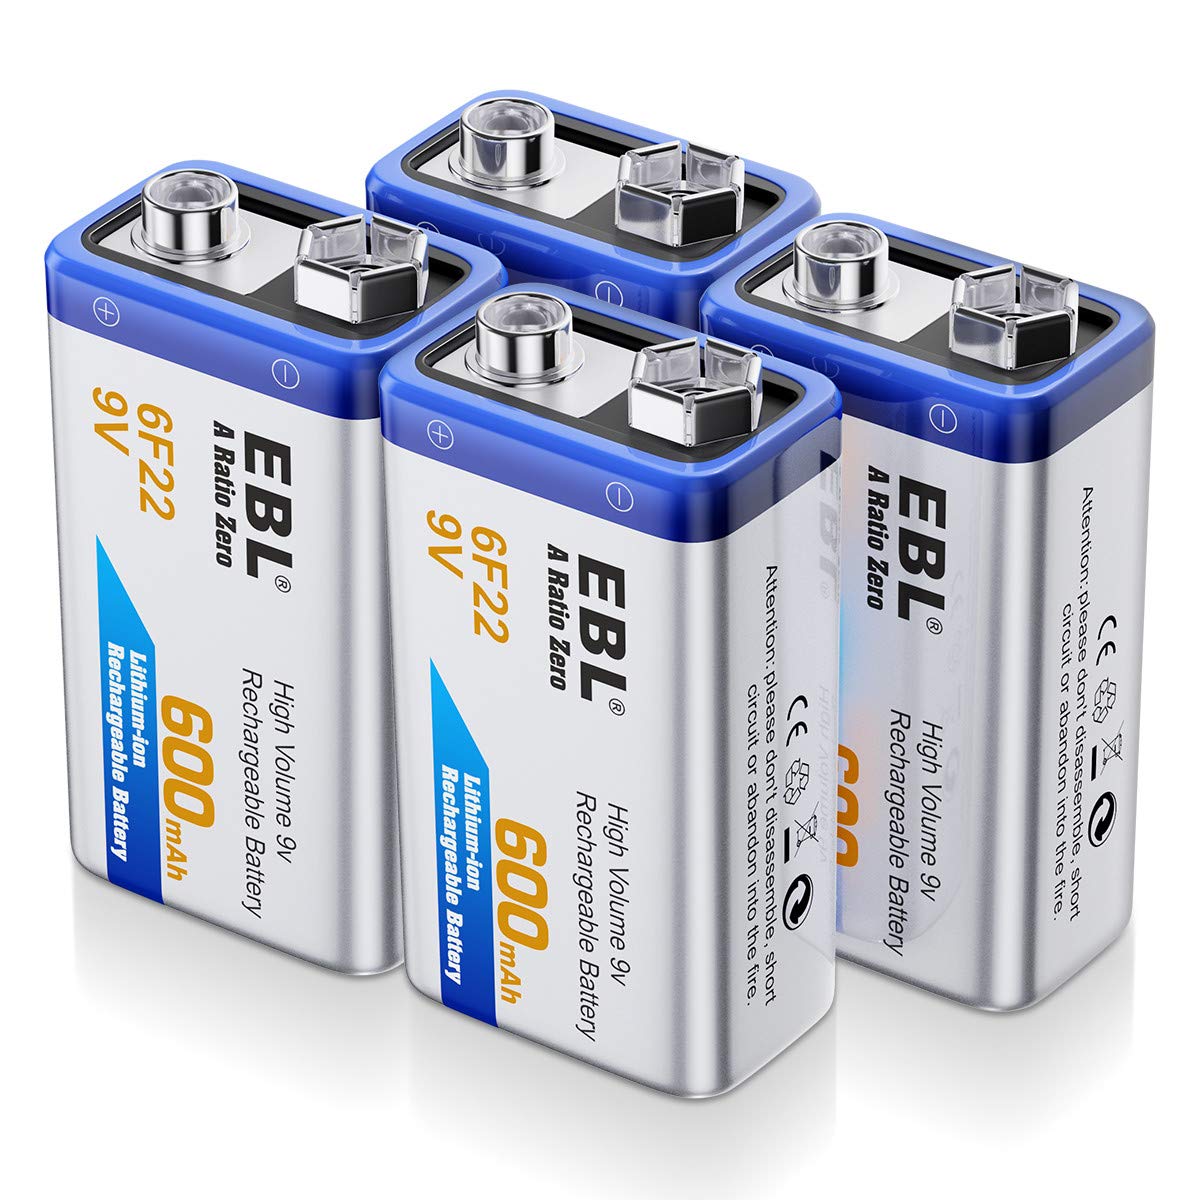 India Lithium-ion Battery Market: Industry Analysis and Forecast (2018-2026)